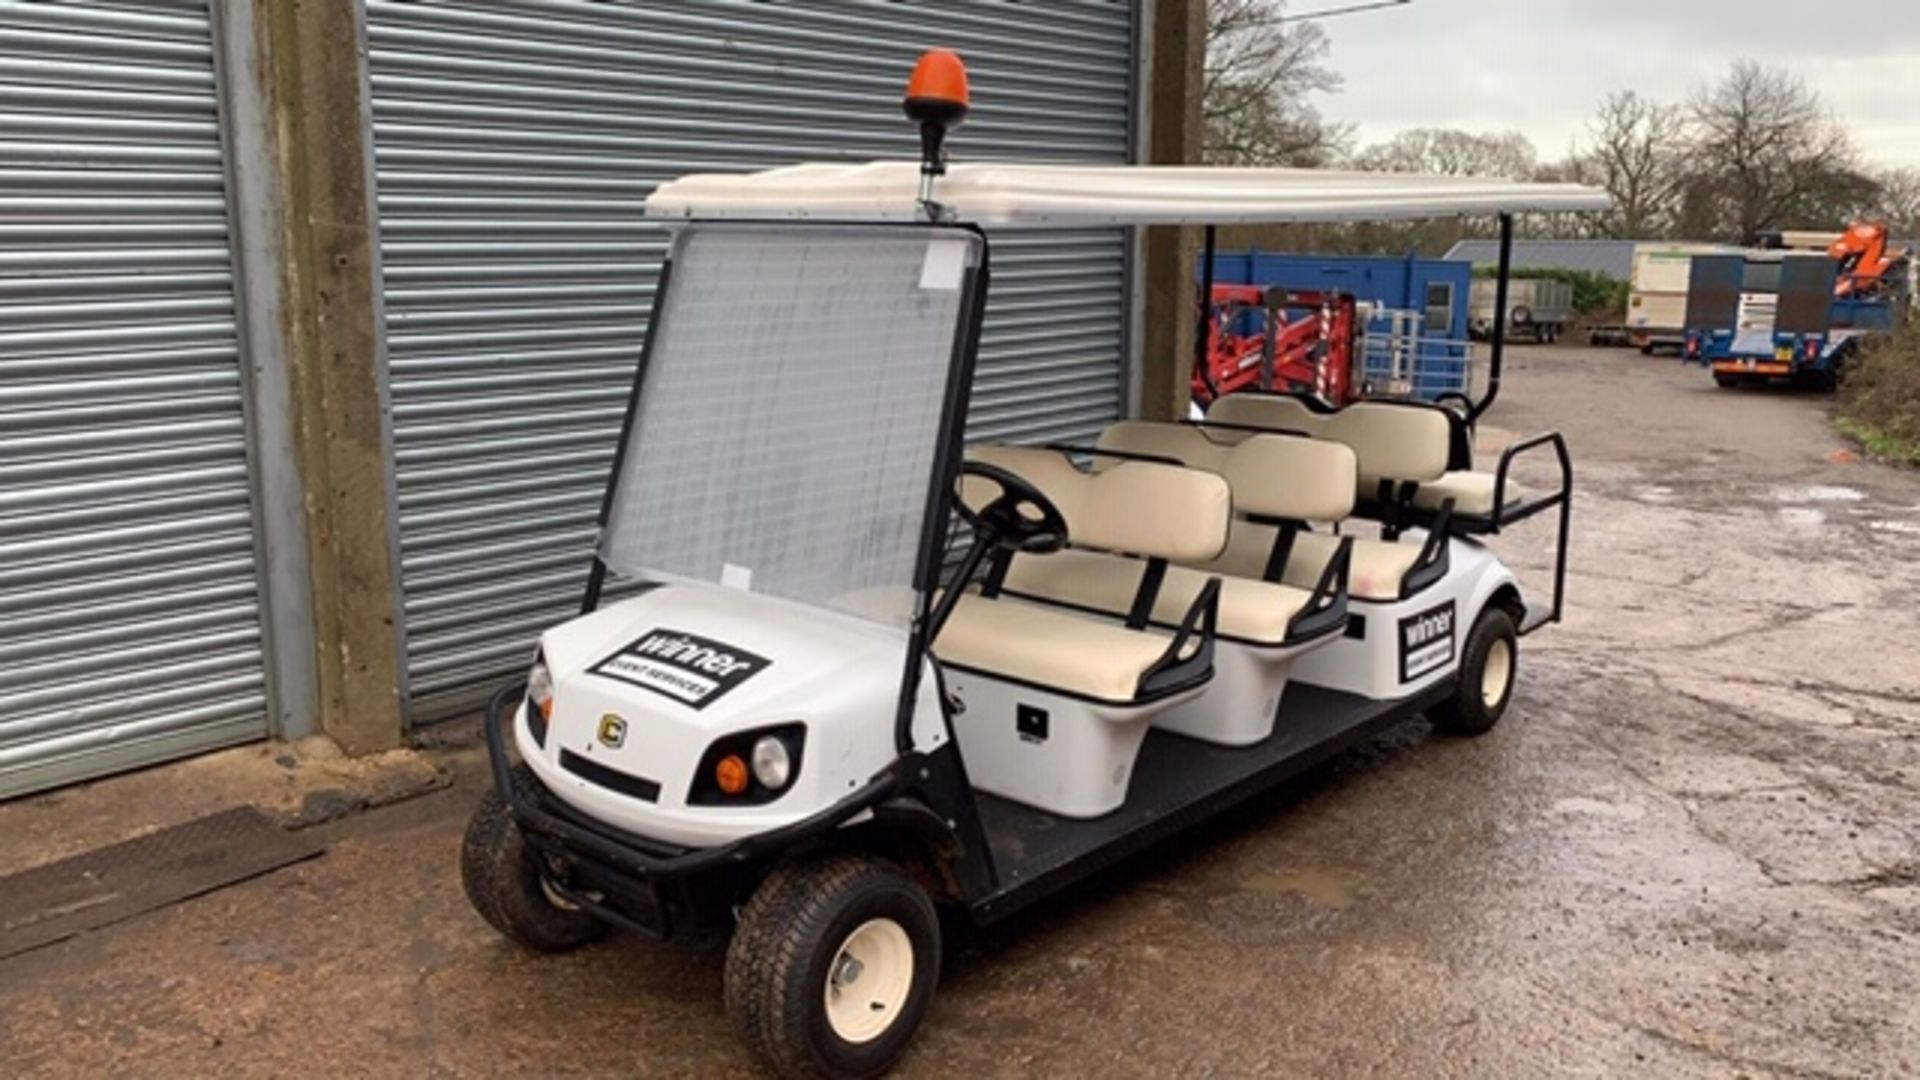 CUSHMAN EZGO SHUTTLE 8 PETROL ENGINED 8 SEATER GOLF / EVENTS BUGGY. YEAR 2017 BUILD. DIRECT FROM - Image 5 of 6